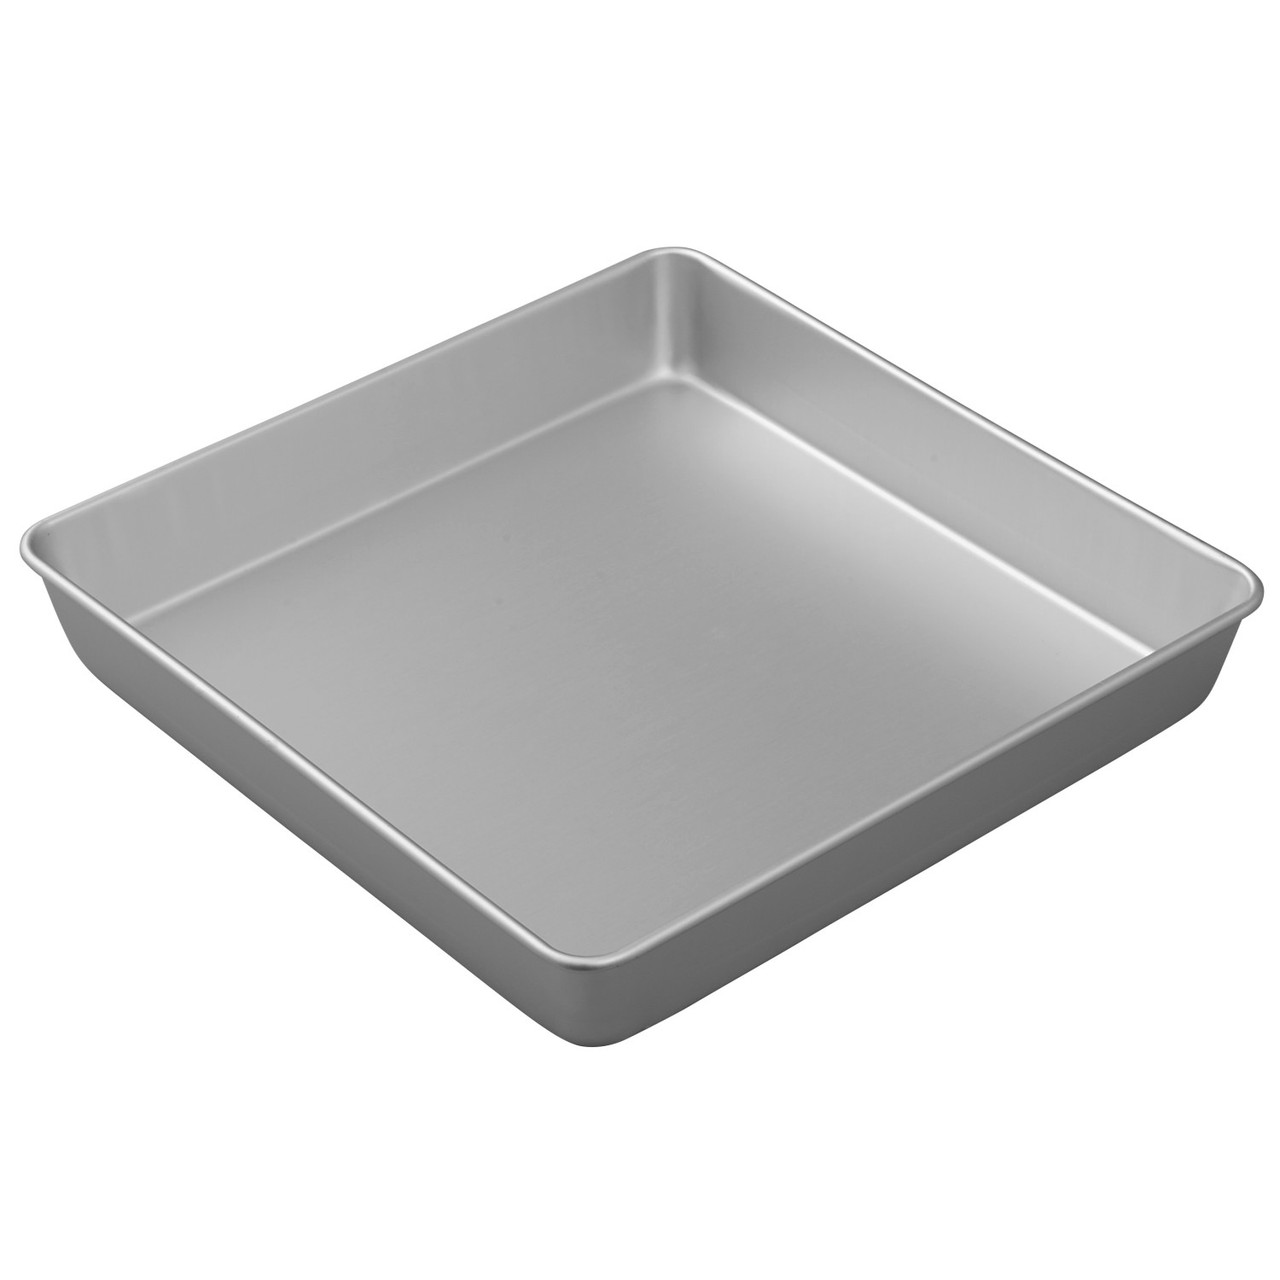 KitchenDance Disposable Aluminum Square Cake Pan - 7-7/8 x 7-7/8 Inches  Aluminum Foil Pans for Cakes, Brownies - Baking Pans Perfect for Baking